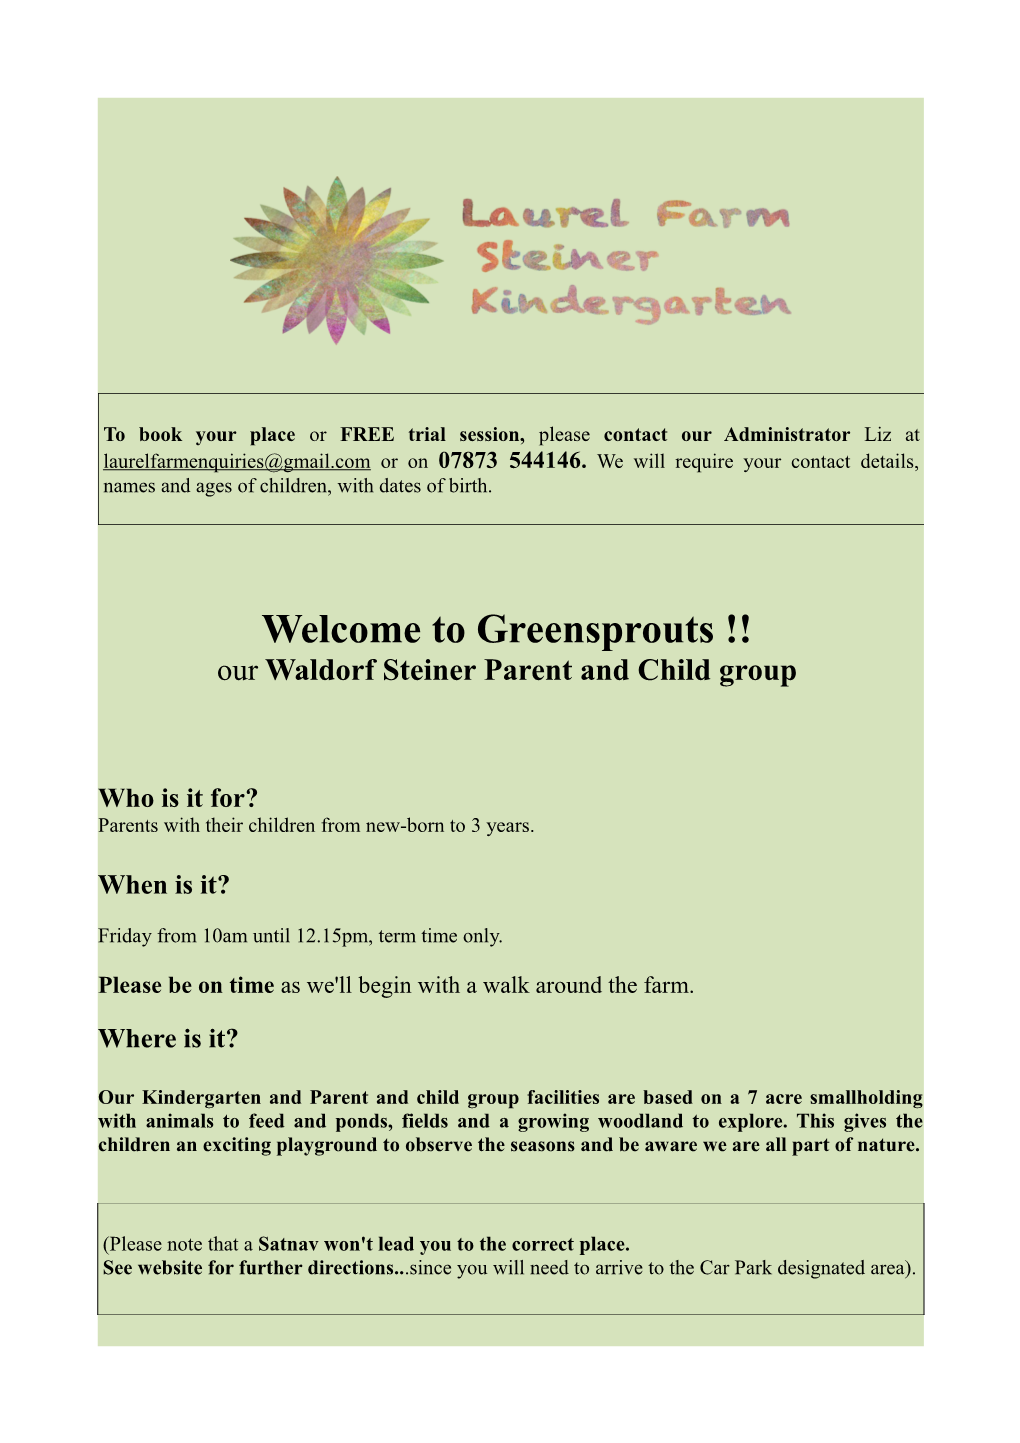 Our Waldorf Steiner Parent and Child Group